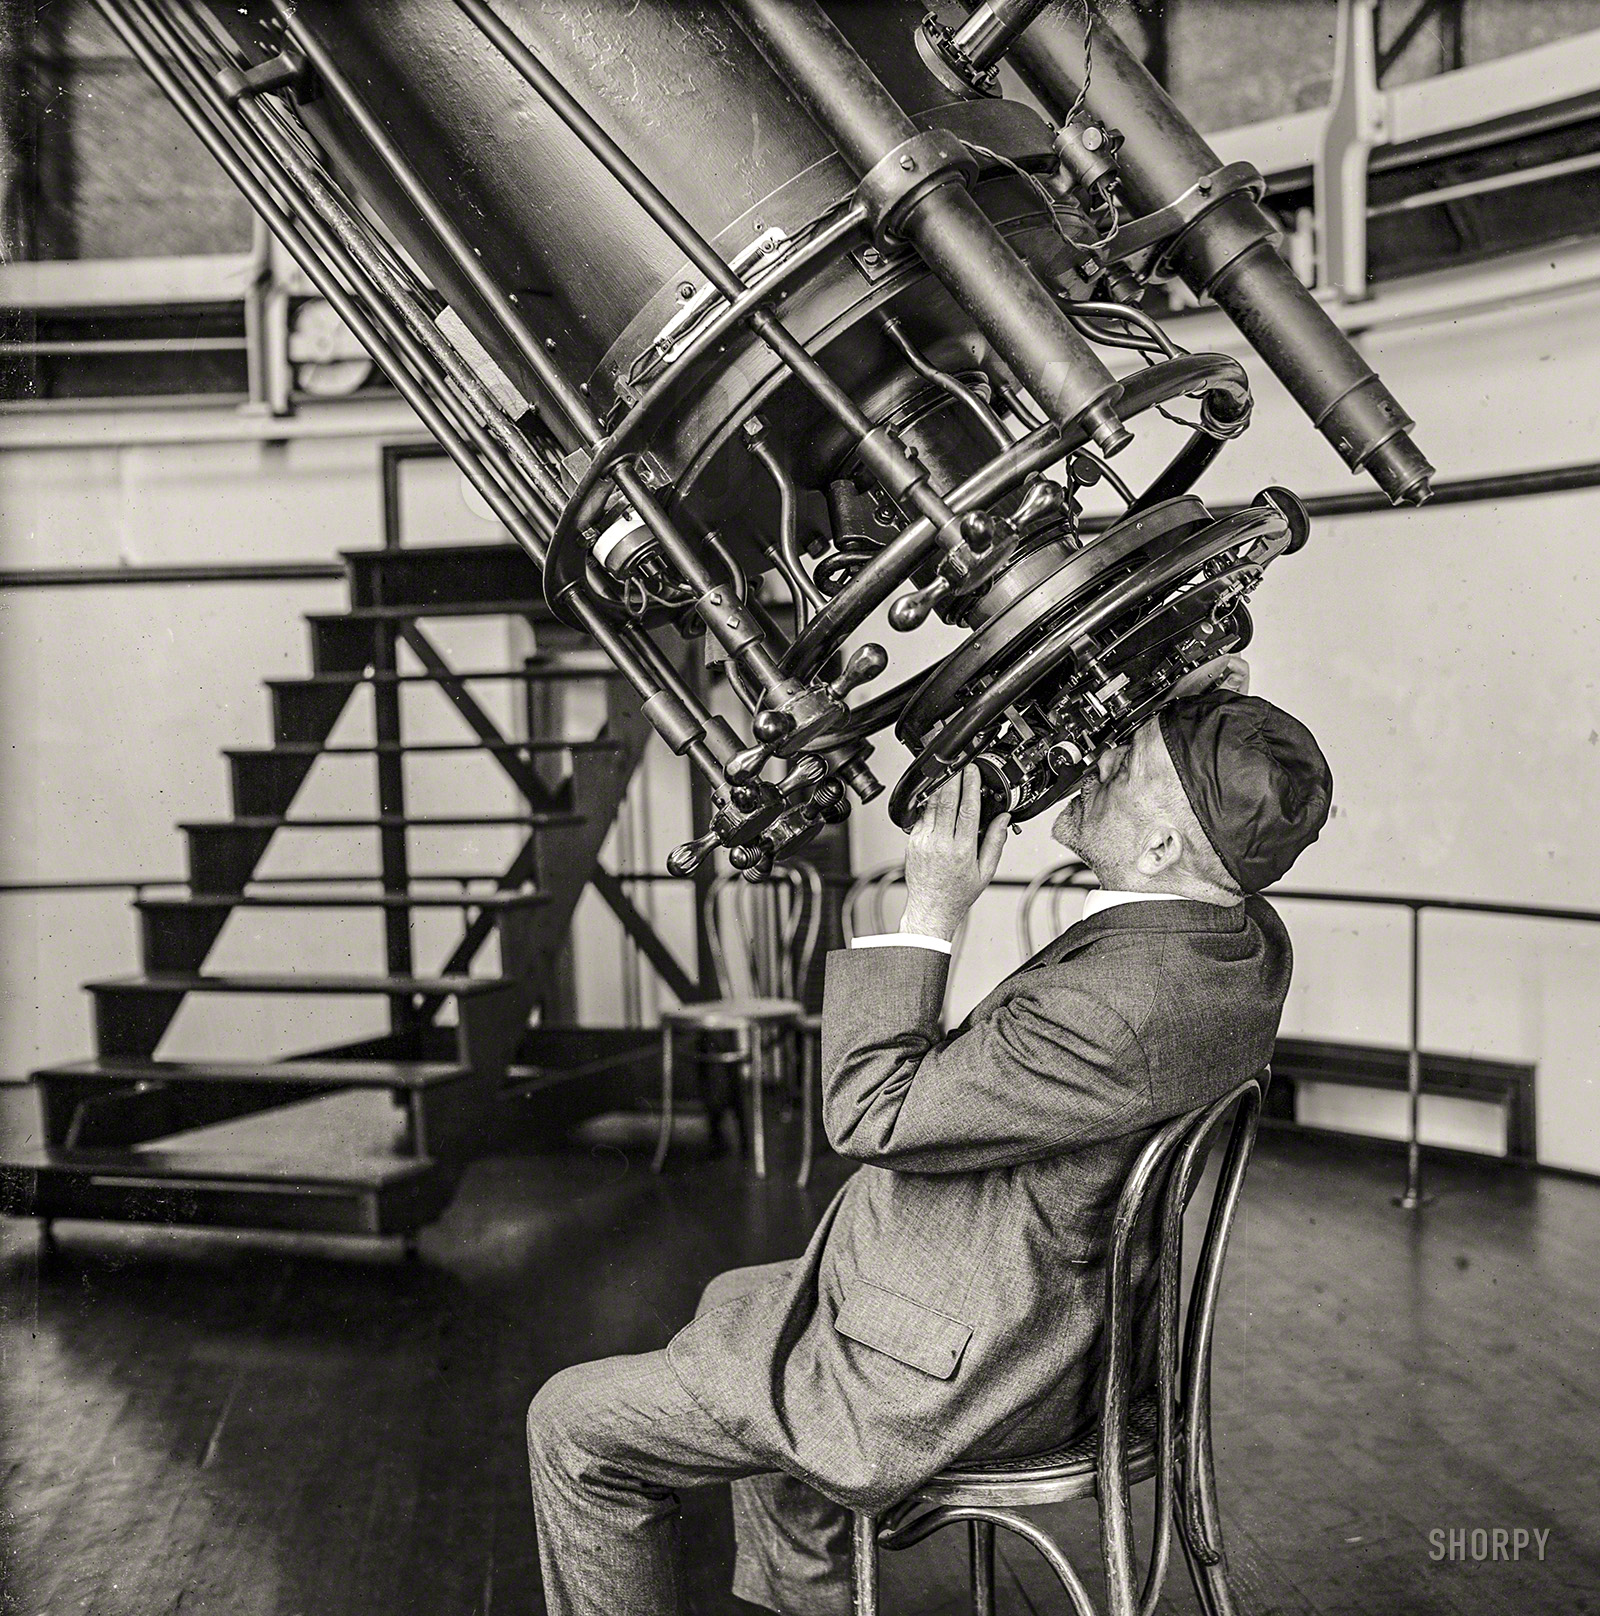 August 18, 1924. "Prof. Hall of Naval Observatory with 26-inch telescope." National Photo Company Collection glass negative. View full size.